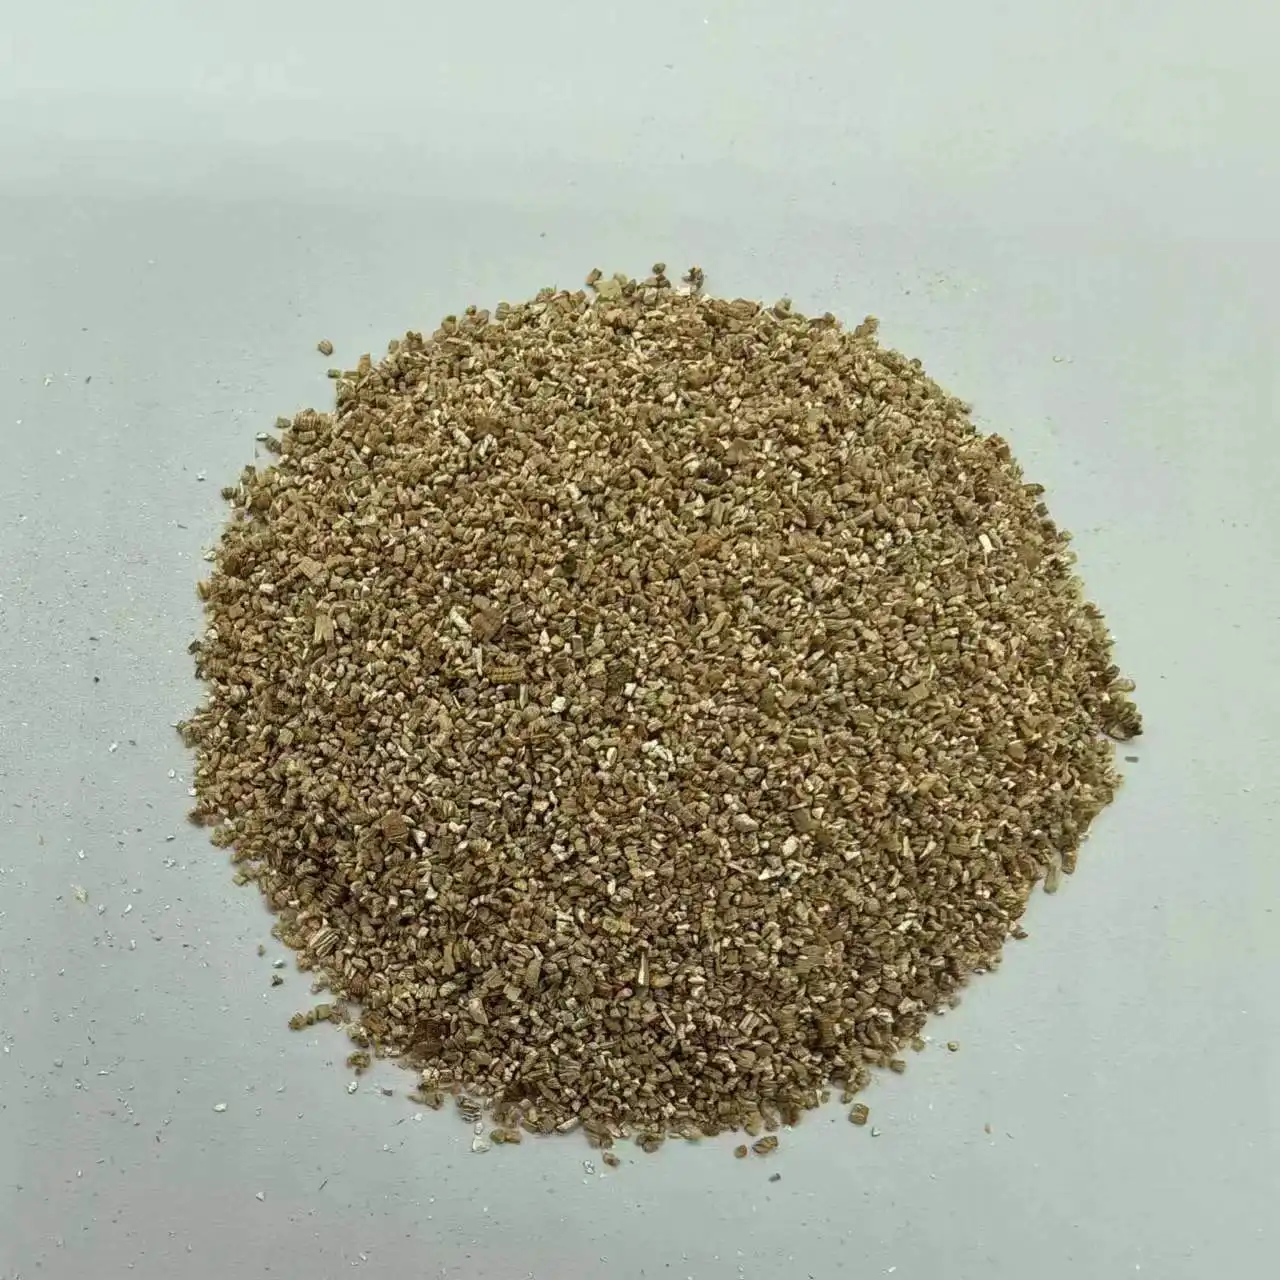 Natural agricultural horticultural hydroponics vermiculite concrete vermiculite-price vermiculite agricultural